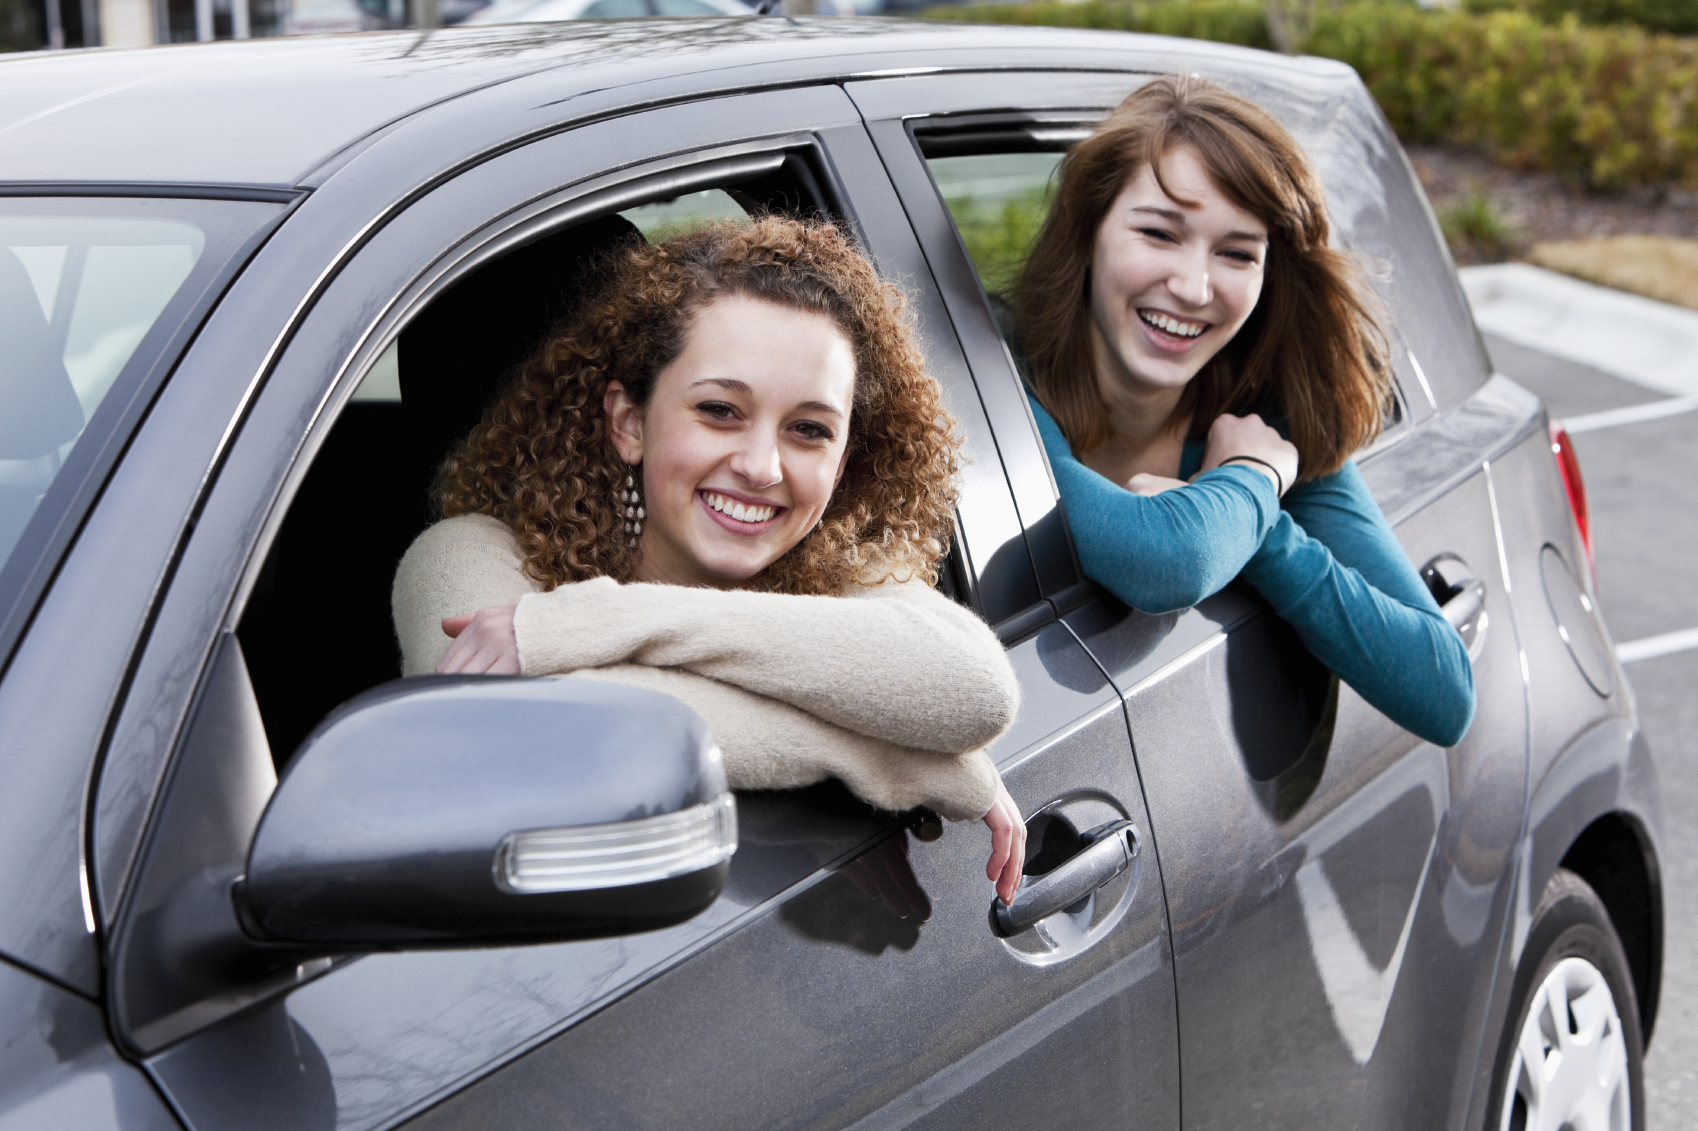 Safe Teen Driving - Teenagers starting from 16 years can learn to drive a car in Canada